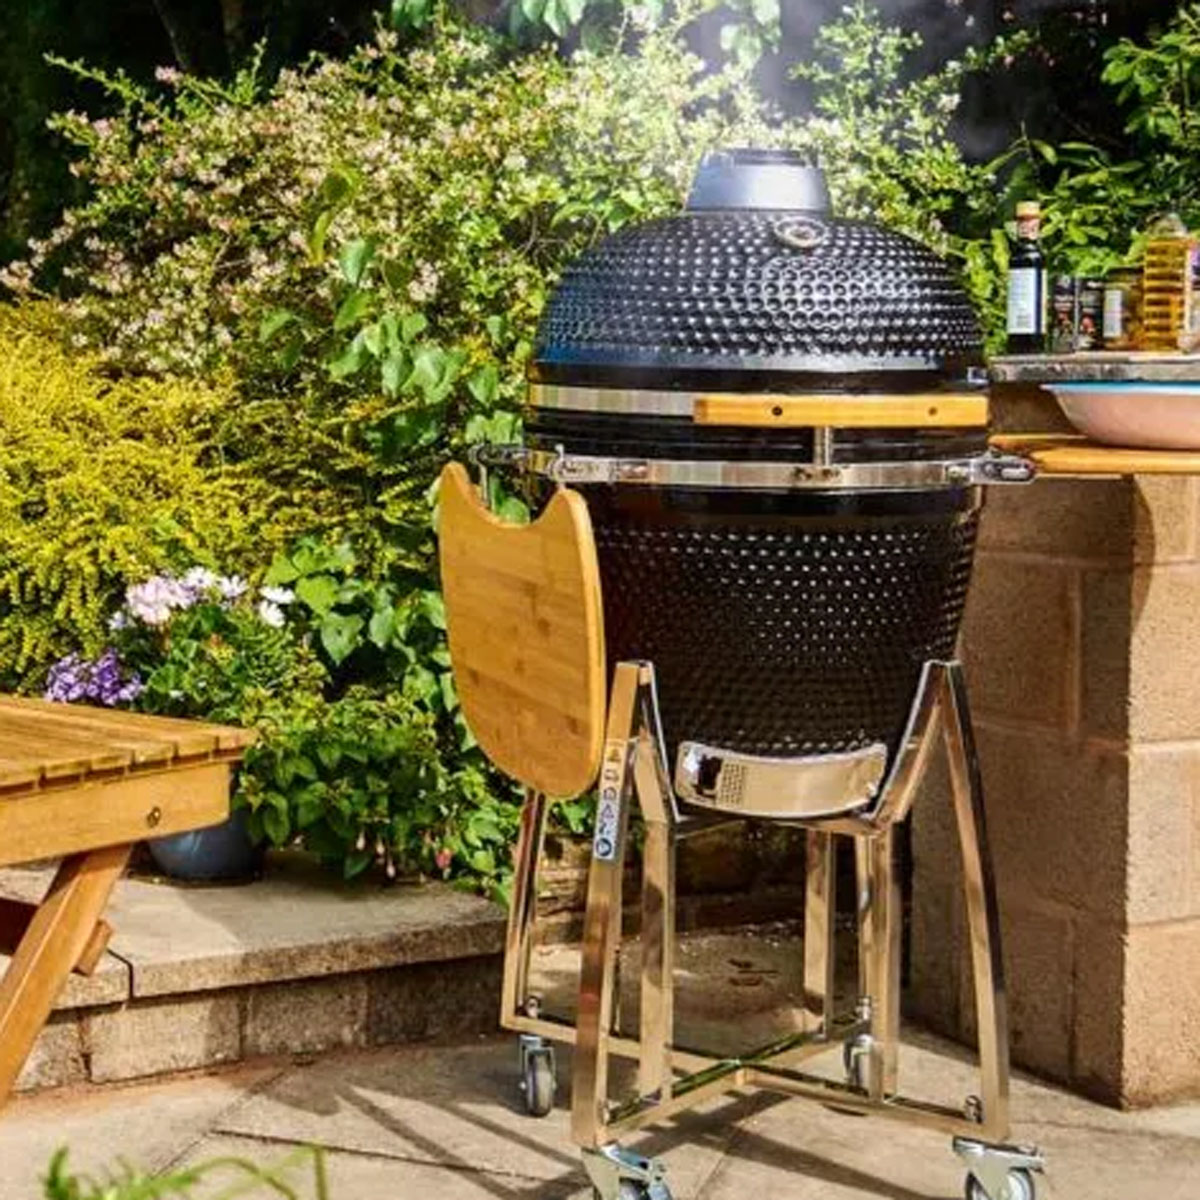 Kamado Egg BBQ - Versatile Charcoal Barbecue Grill with 7 Cooking